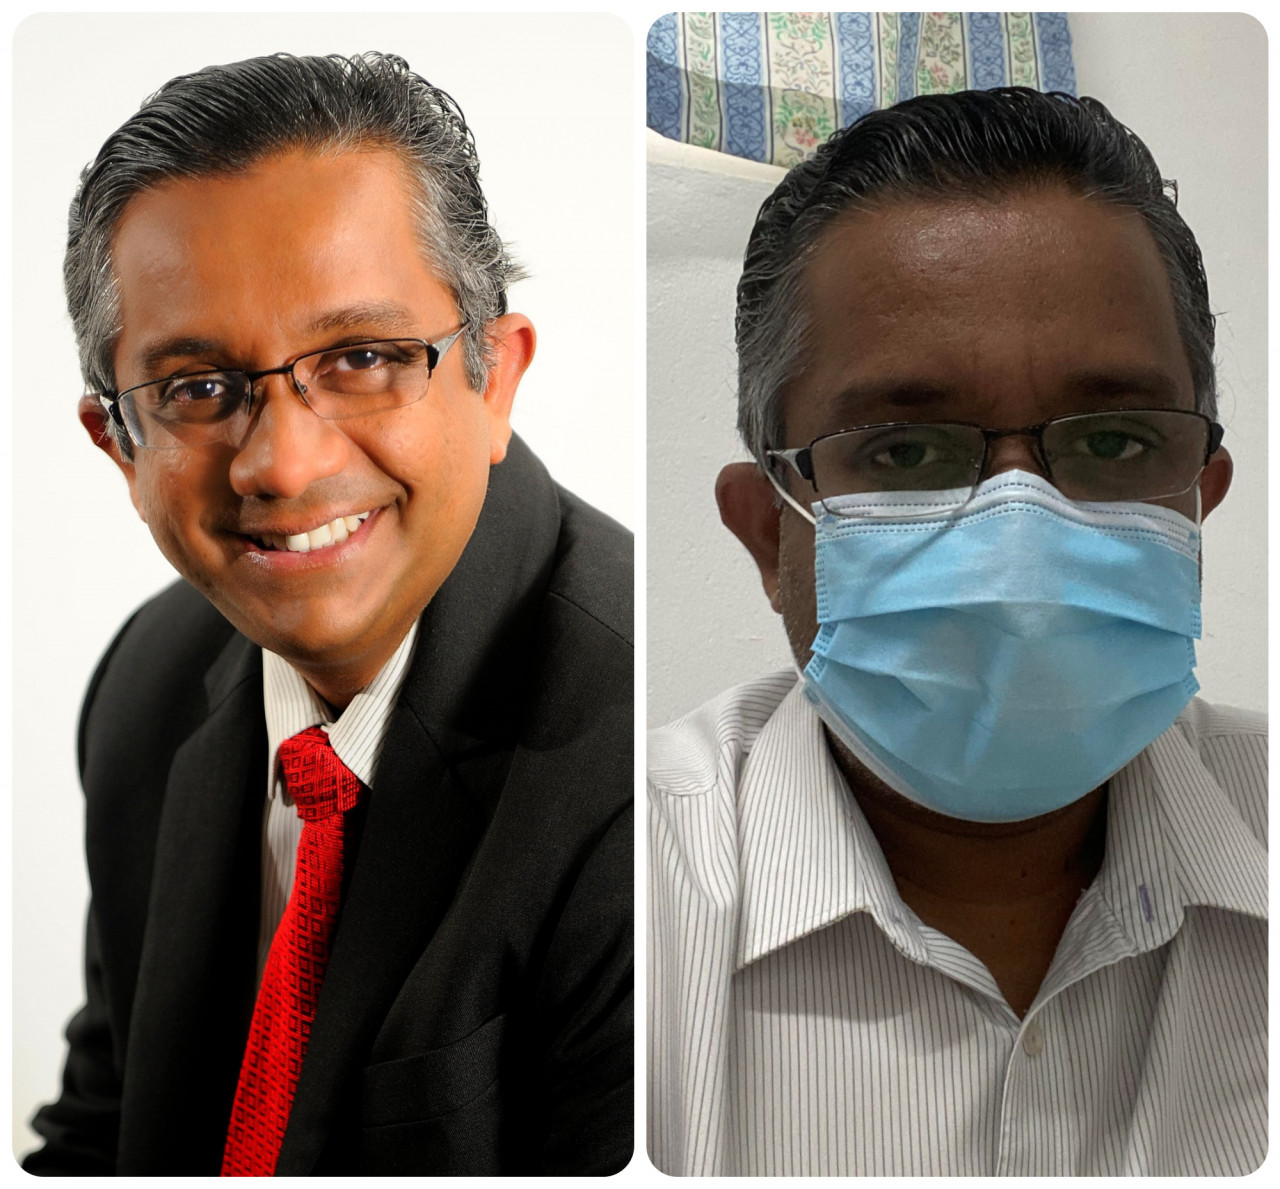  (L) Dr Rajesh is a lecturer at Universiti Malaysia, Sabah and practises at Queen Elizabeth Hospital, Kota Kinabalu. (R)  Dr Rajesh is currently under quarantine, after coming into contact with a positive patient. – Pic courtesy of Rajesh Muniandy